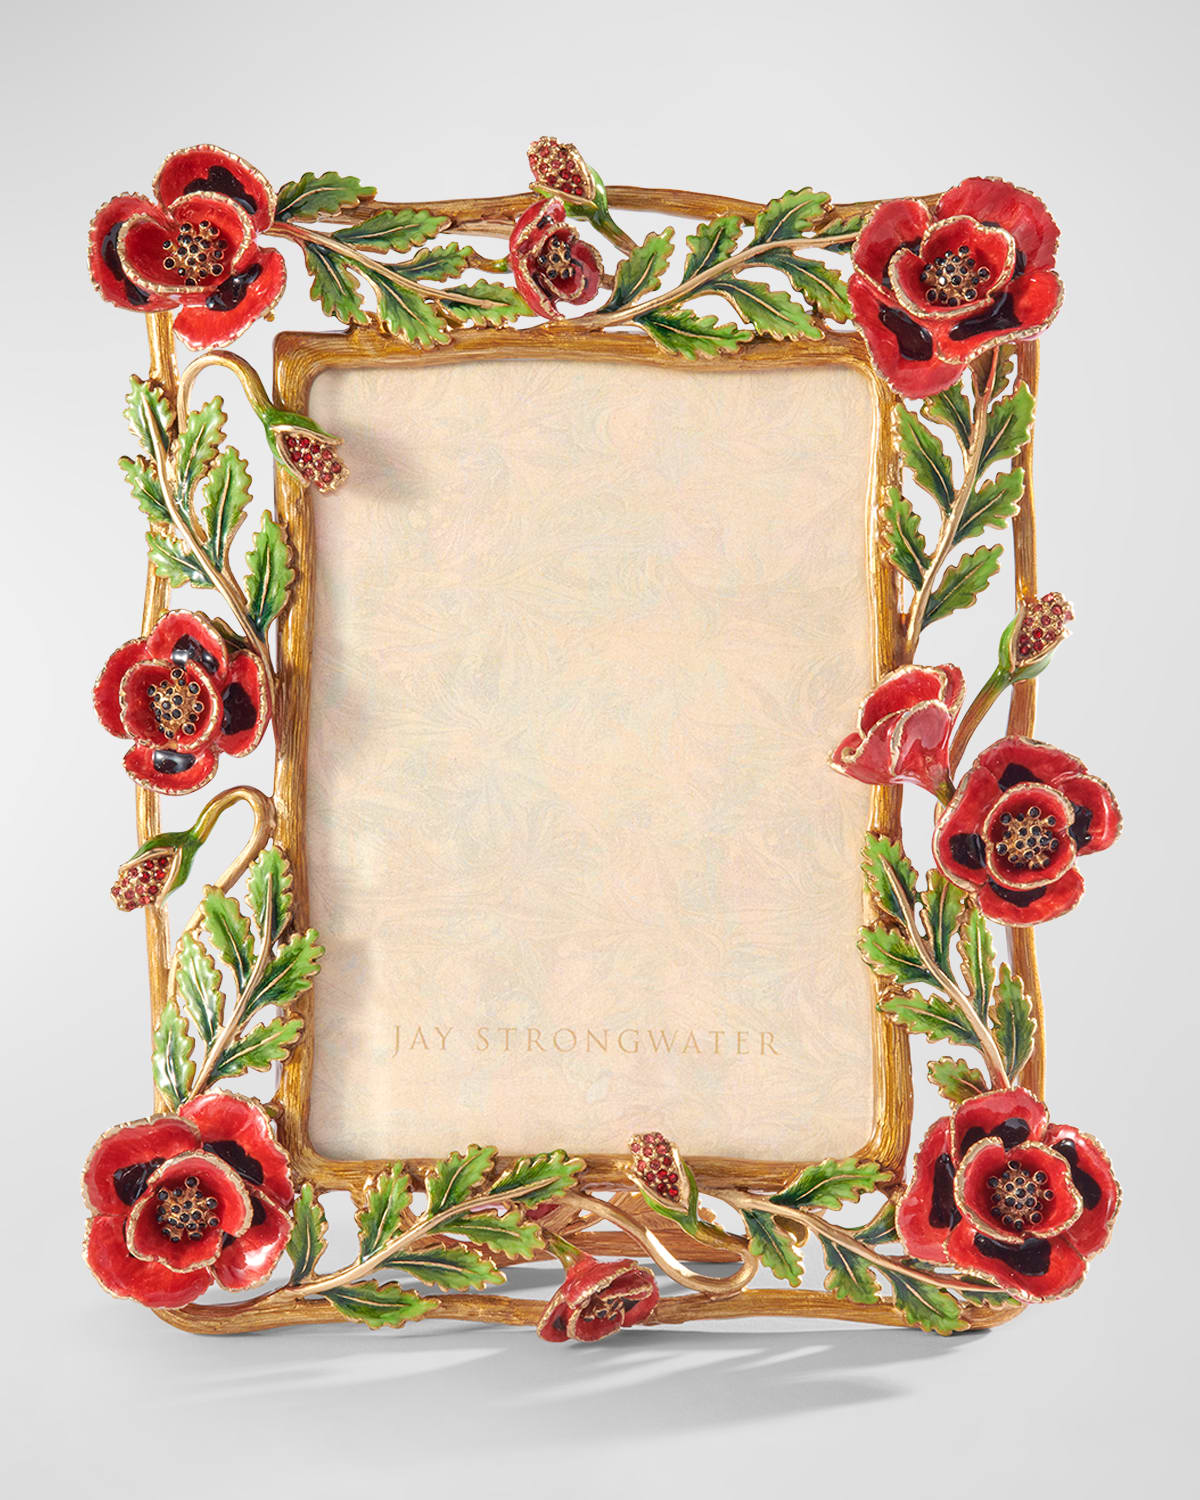 Jay Strongwater Poppy Picture Frame, 5" X 7"